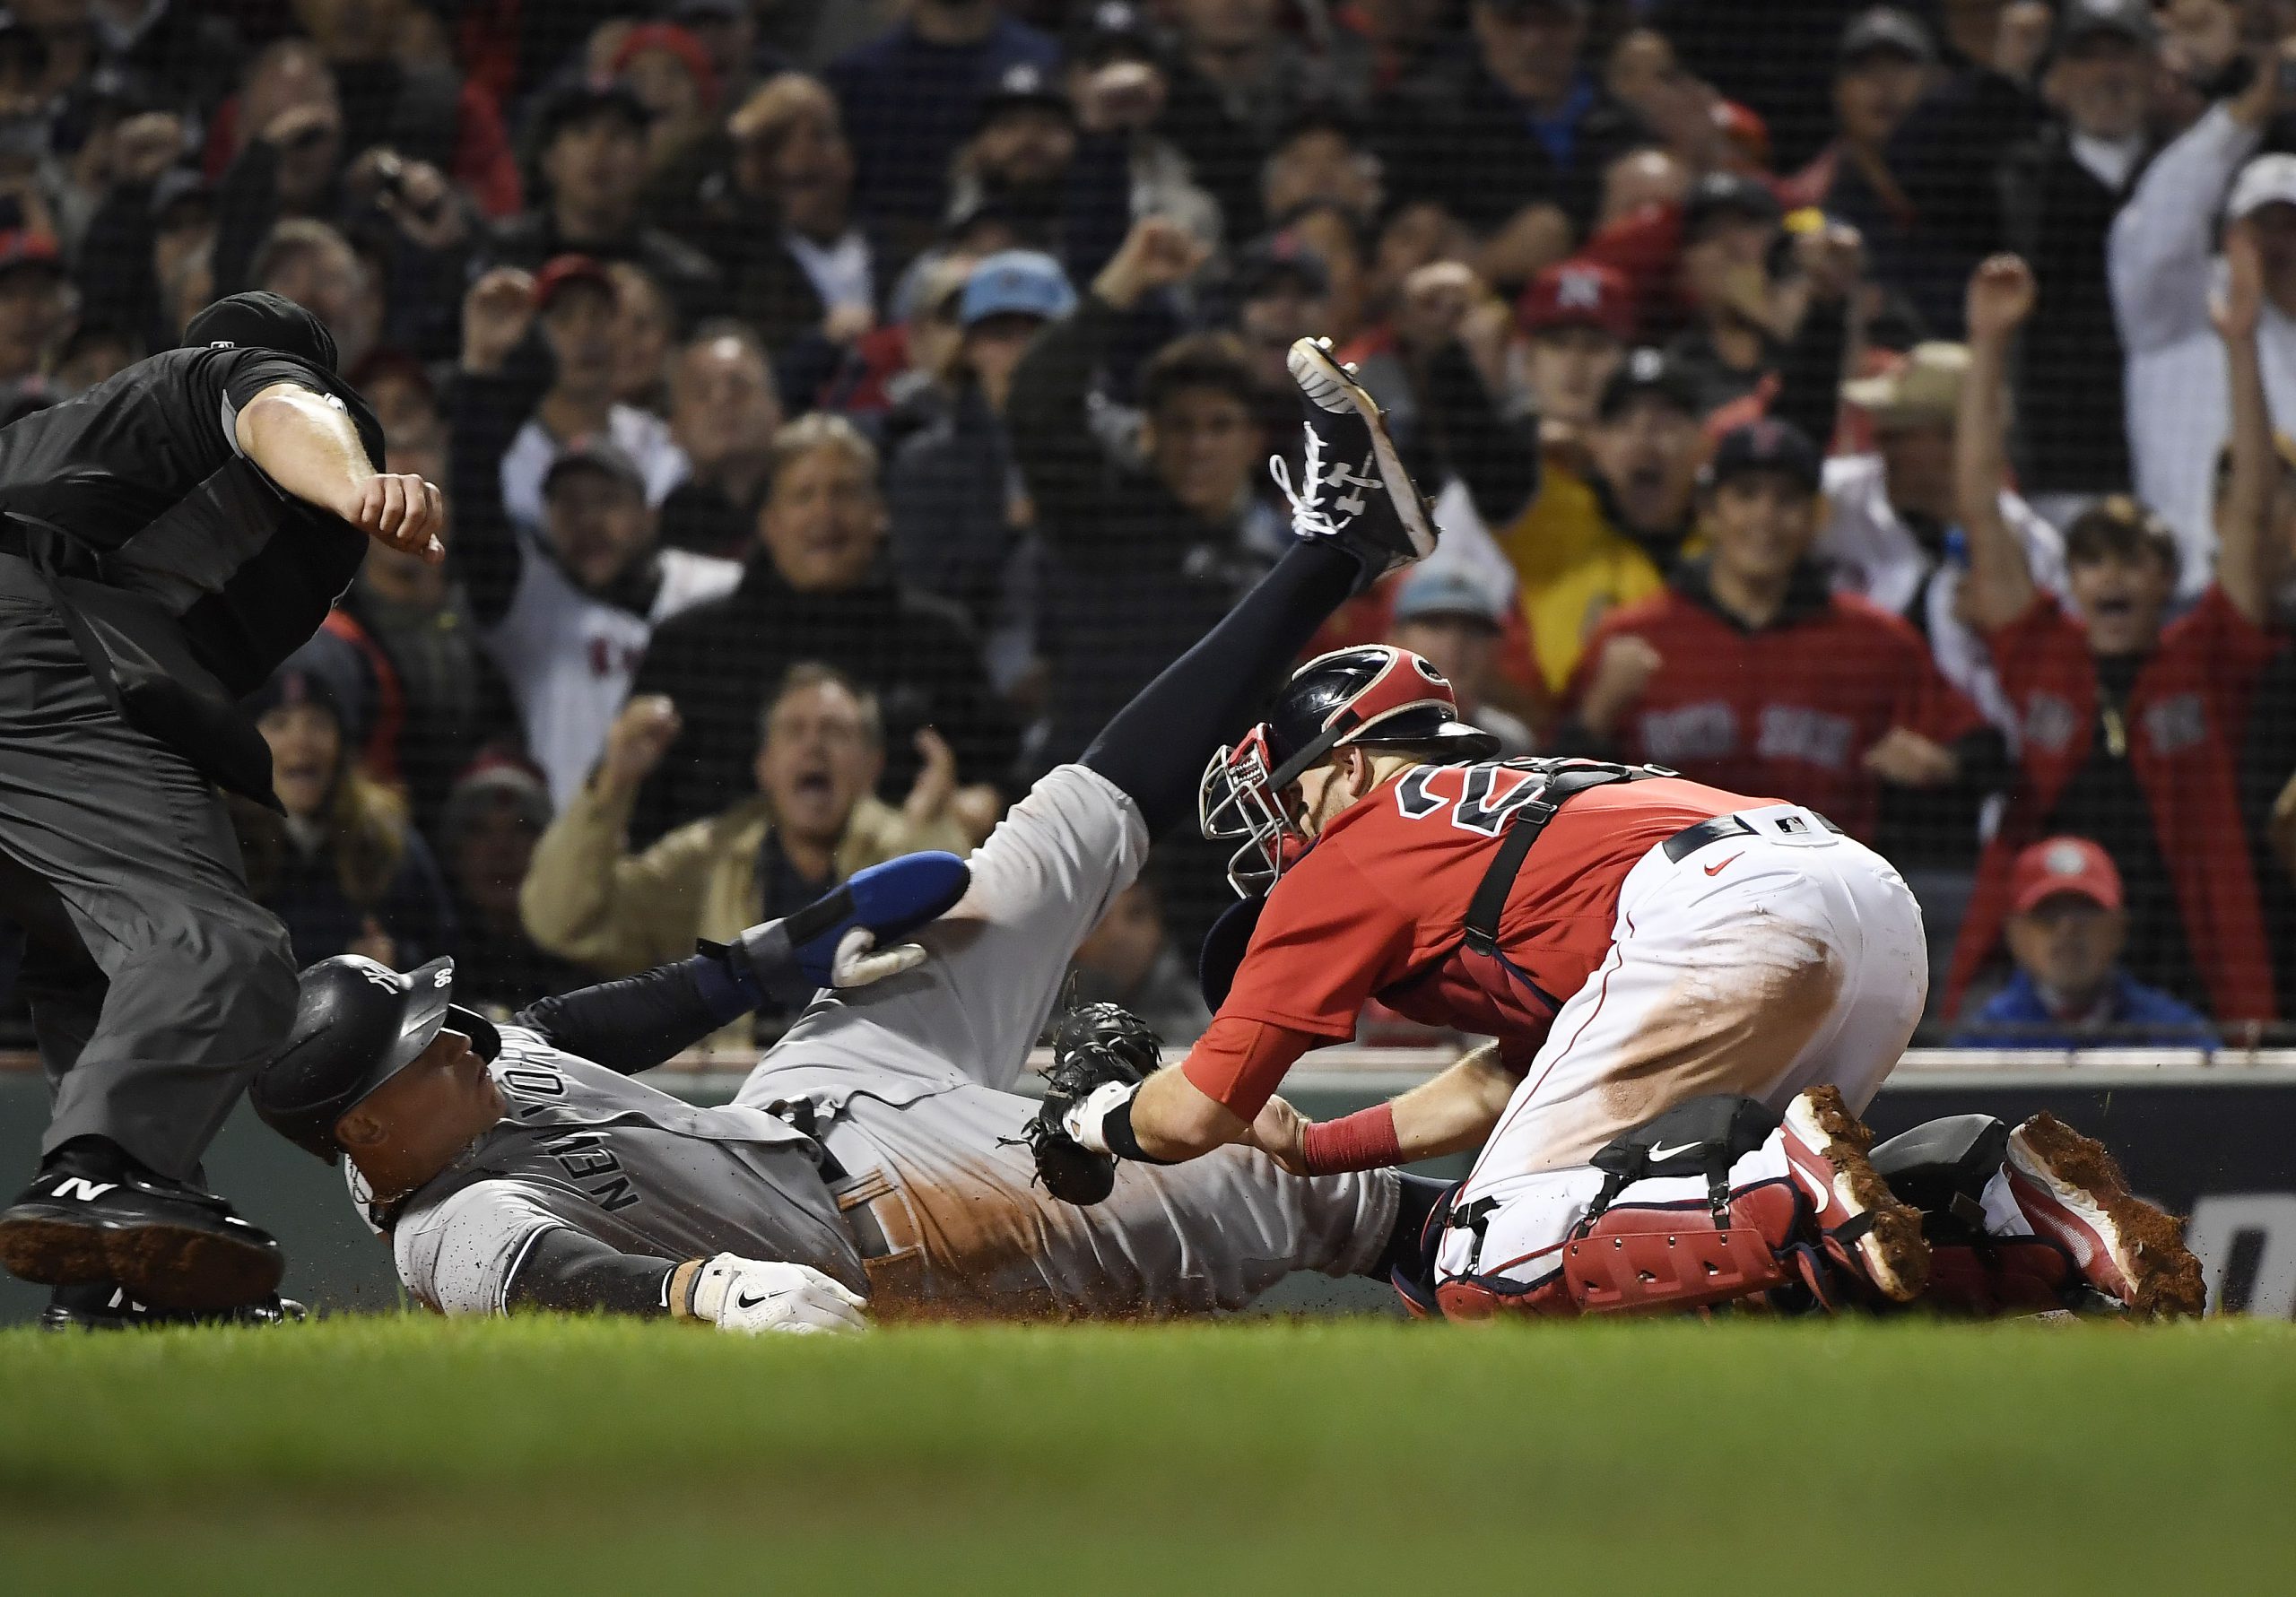 Poor yankees mlb jersey white Yankees baserunning returned at the worst  time